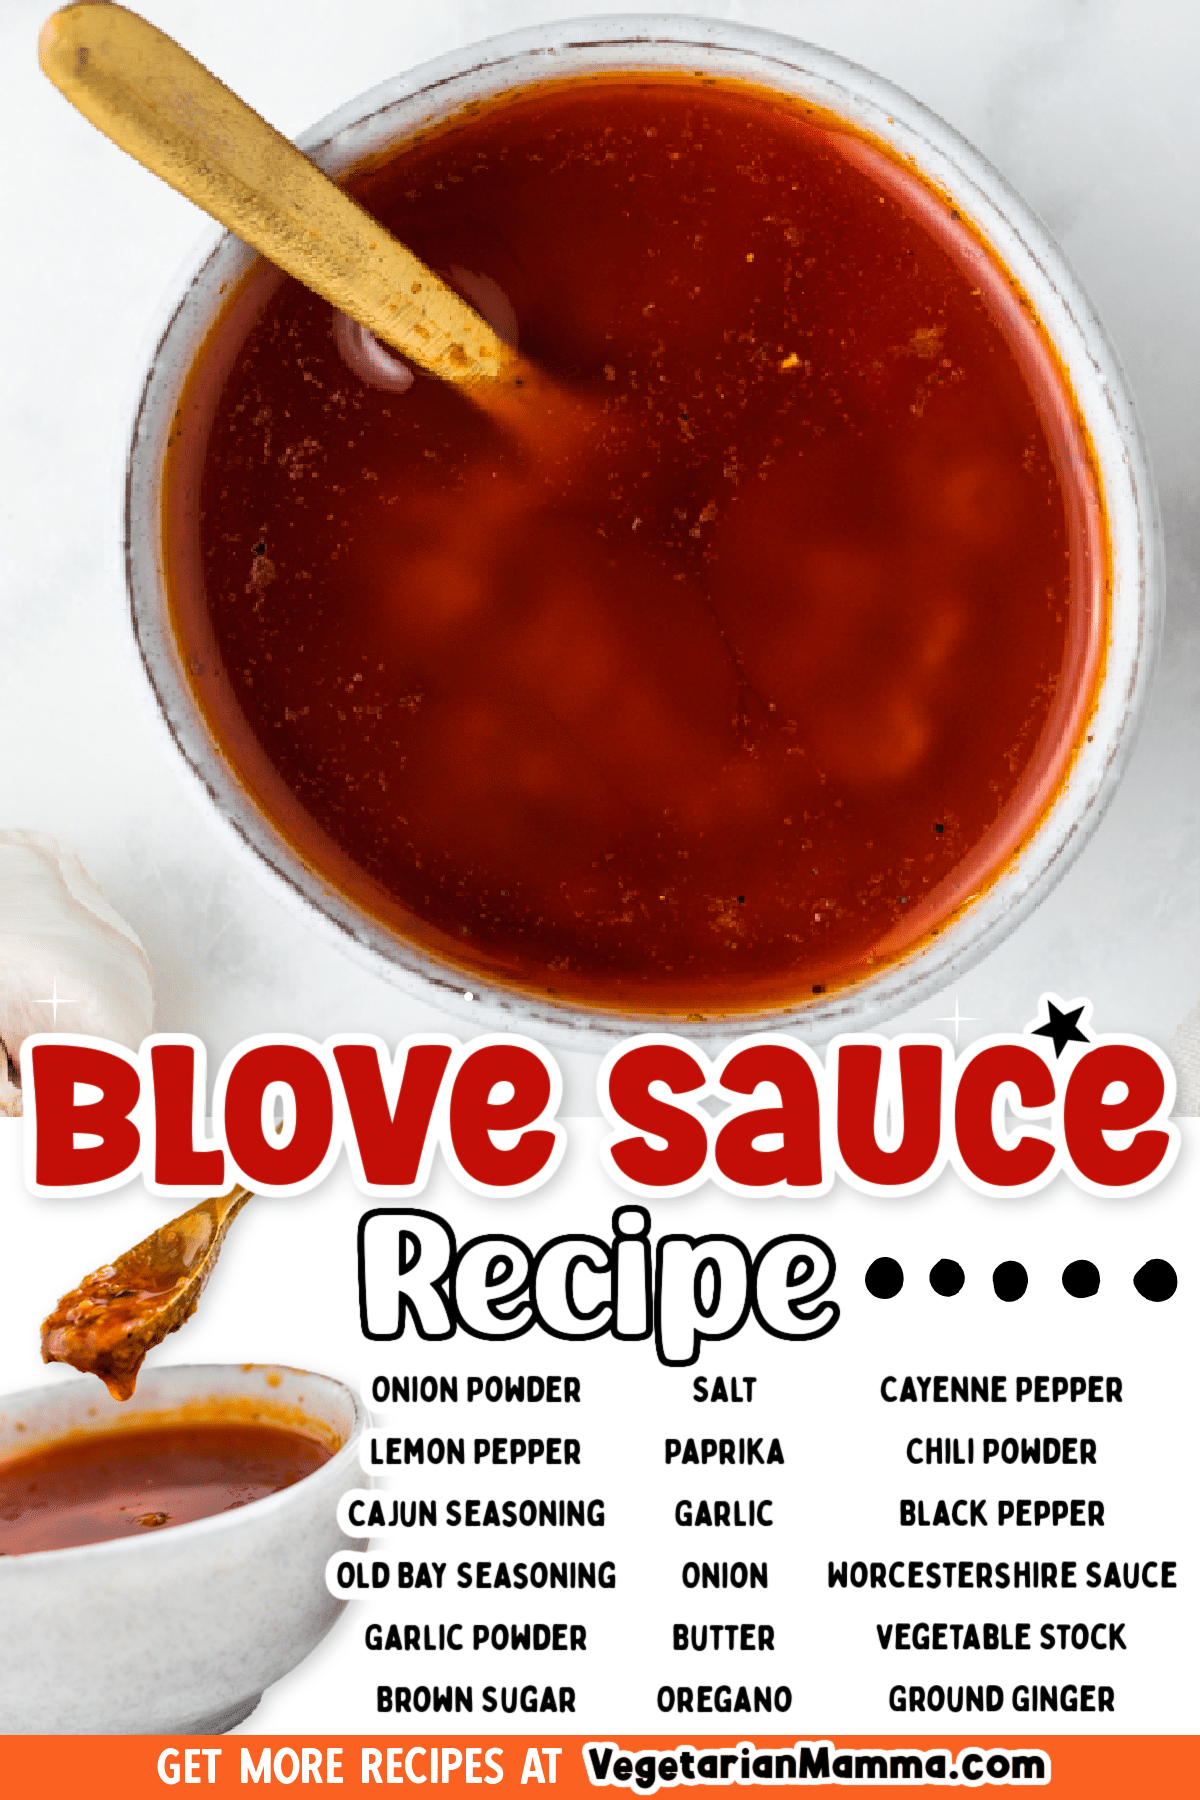 This Bloves Sauce Recipe is a special seasoning mix that is loaded with spices and flavor. Bloves Sauce comes together in less than 20 minutes and is freezer friendly.